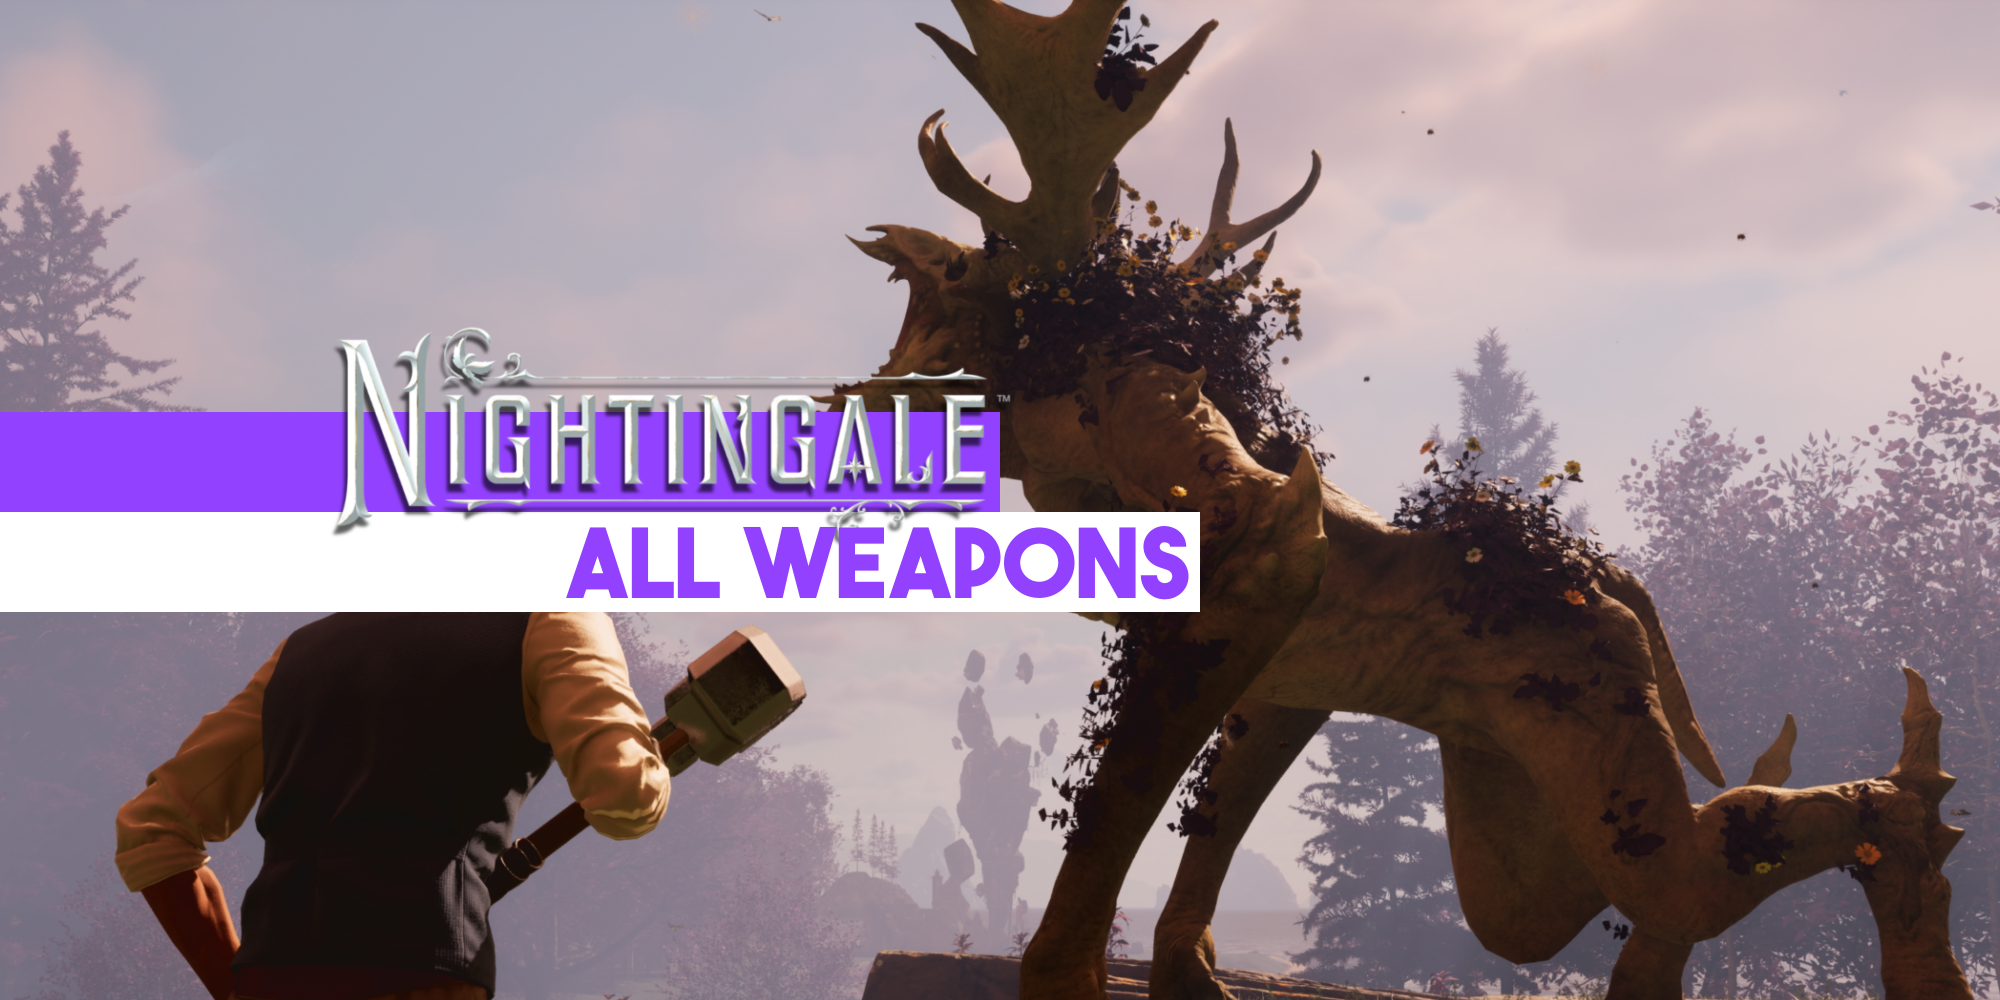 nightingale_all_weapons-2